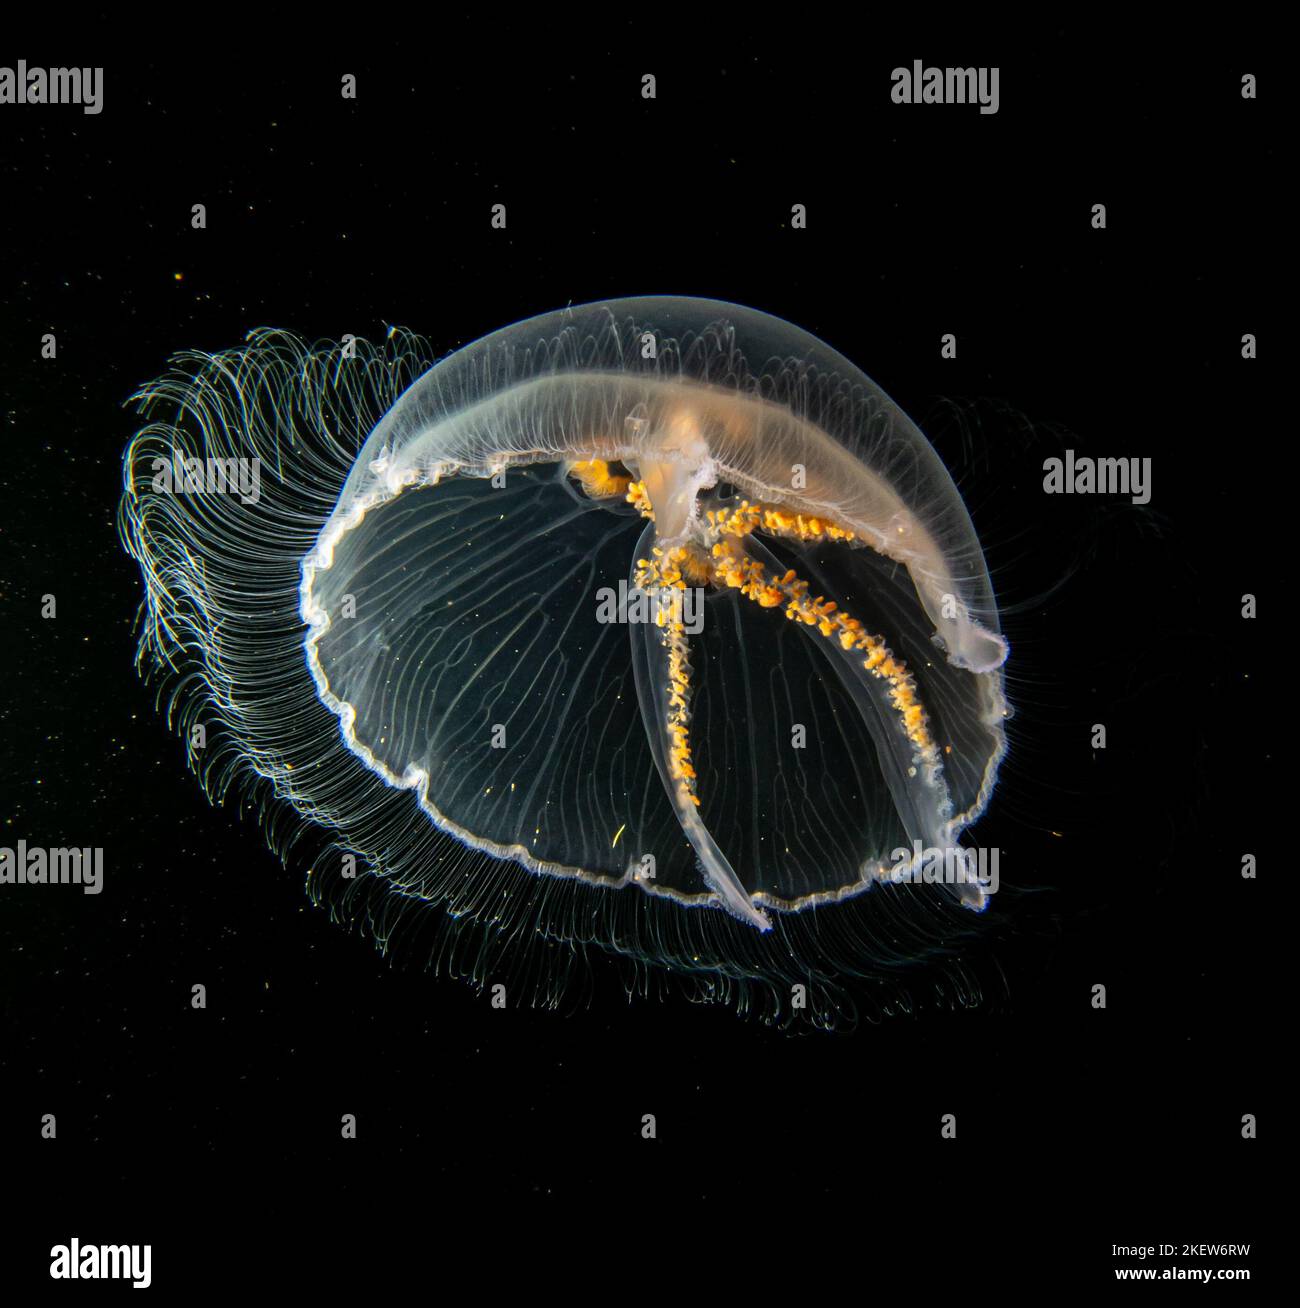 A close-up picture of a Moon jellyfish or Aurelia aurita with black seawater background. Picture from Oresund, Malmo Sweden. Cold water scuba diving Stock Photo